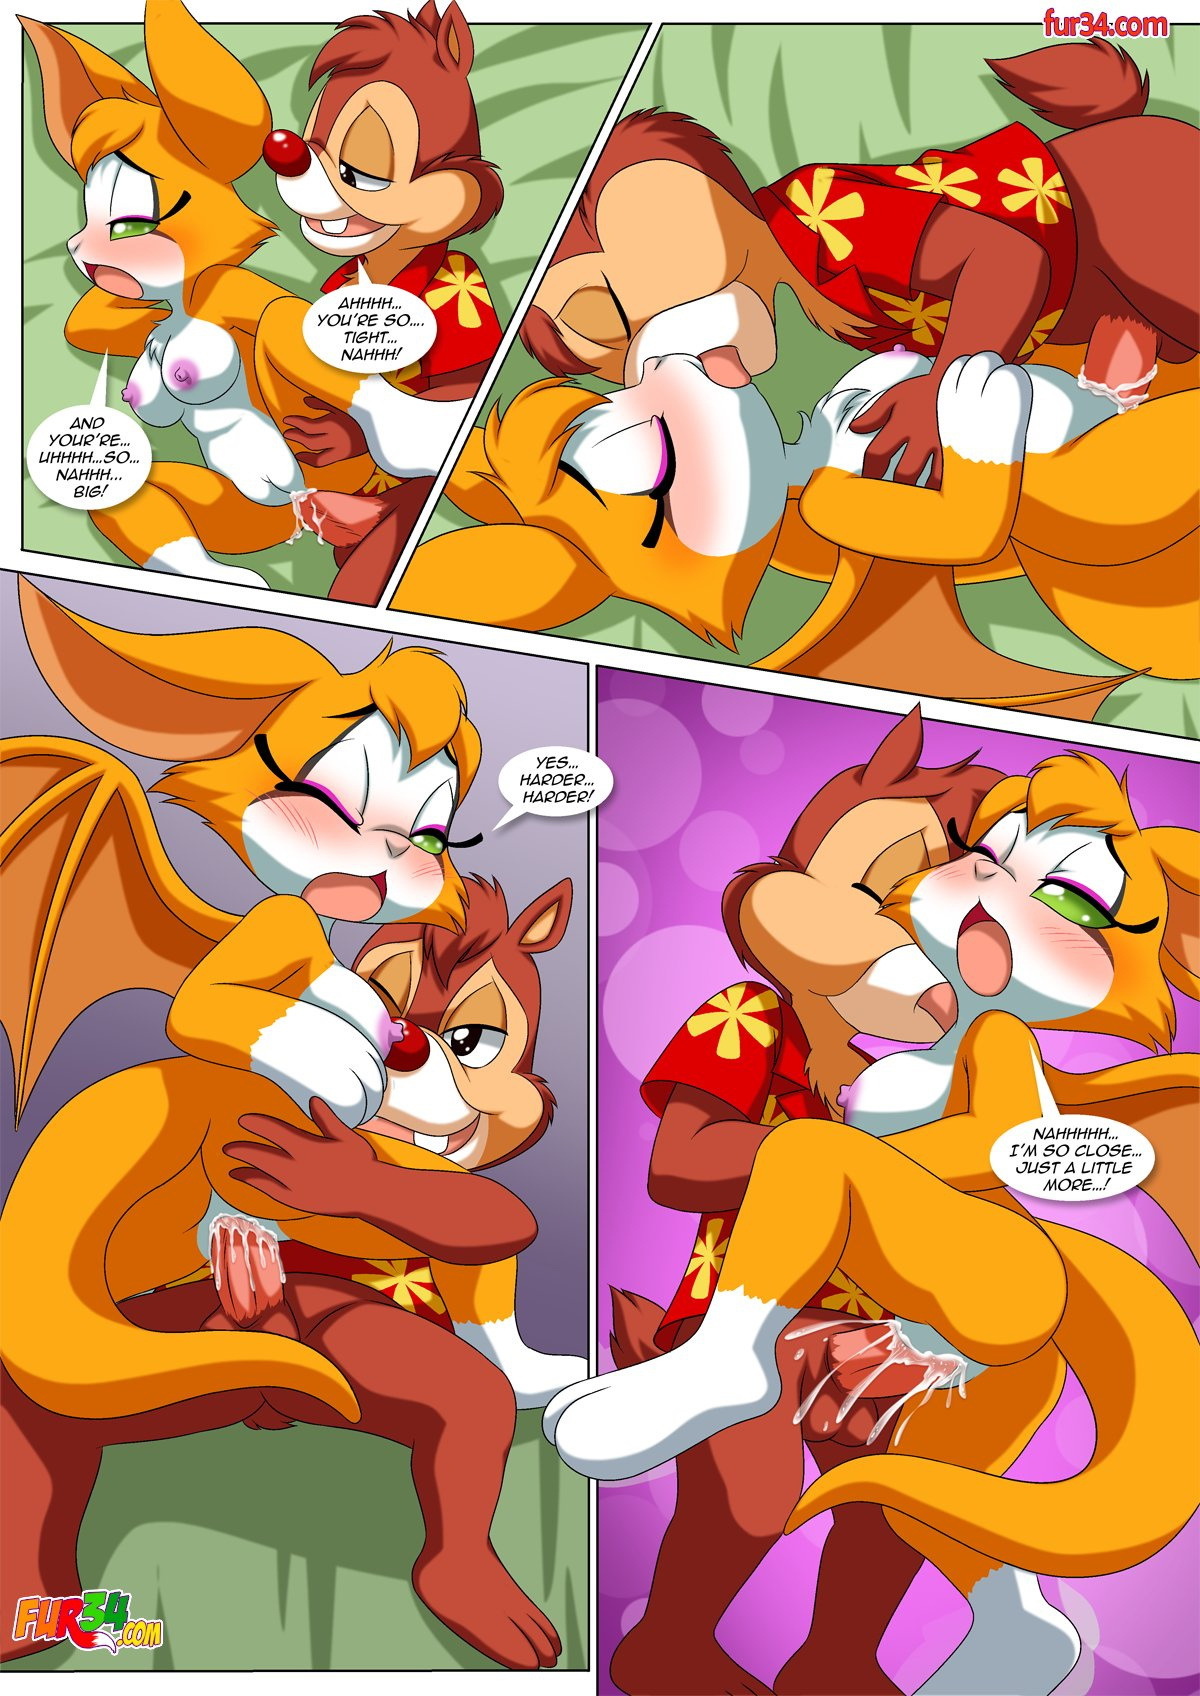 Rescue Rodents 6 - A Time for Love - Page 11